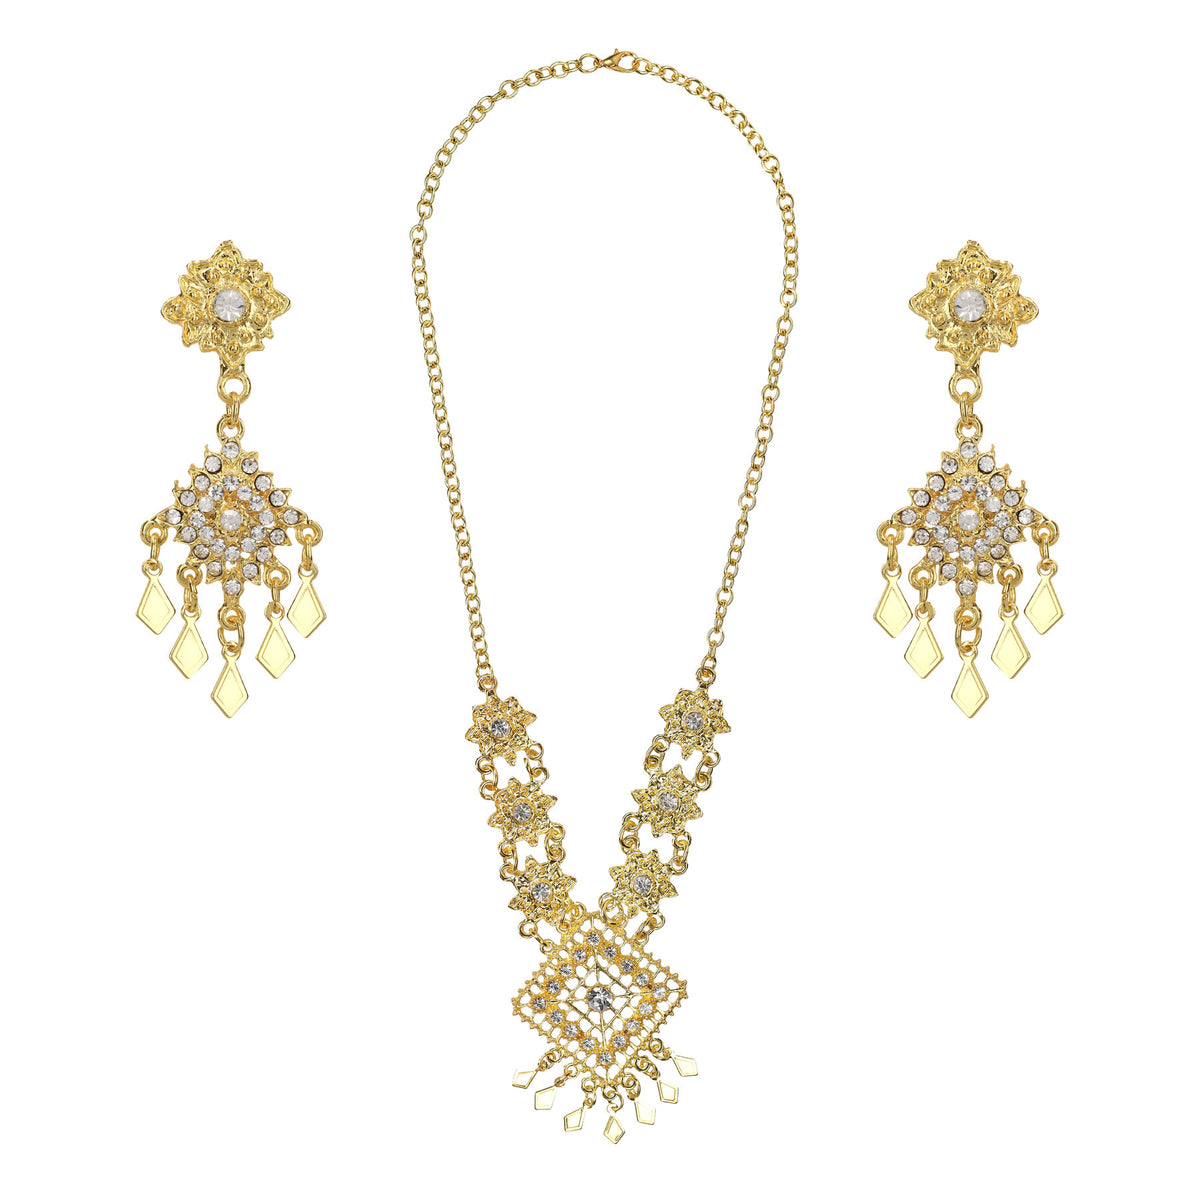 Gorgeous gold Thai necklace and earring set to complete your Traditional Thai outfit.